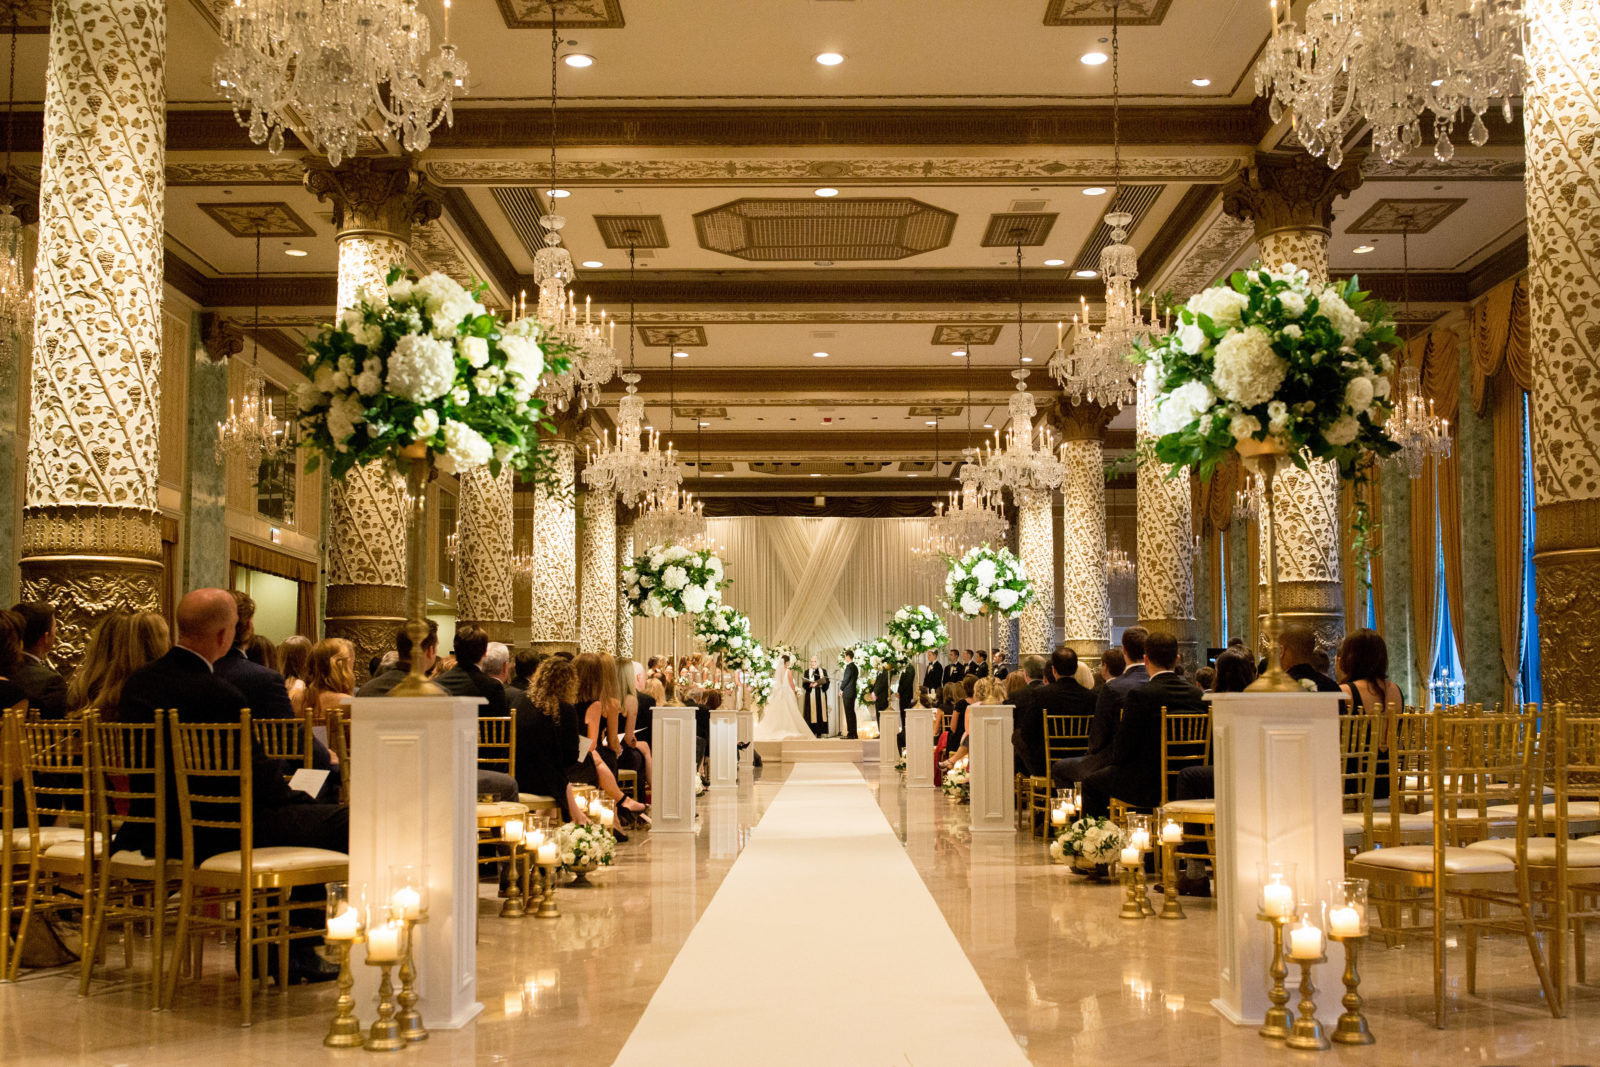 The Drake Hotel Chicago Gold Coast Room Wedding Life in Bloom9 1600x1067